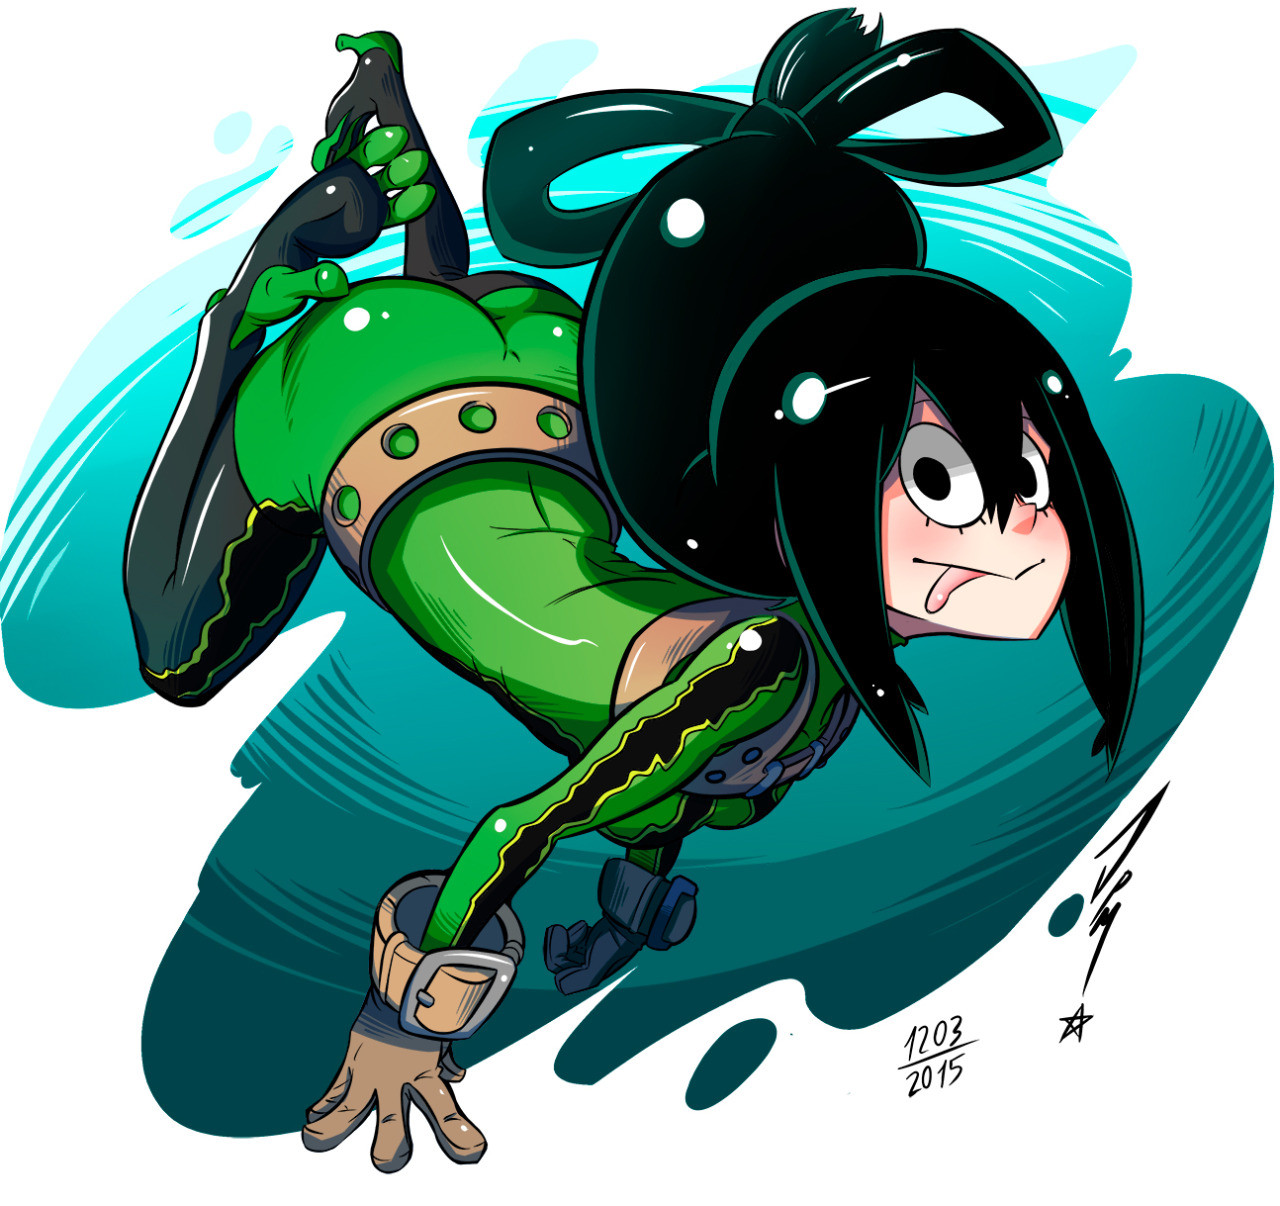 Omega froppy comp.